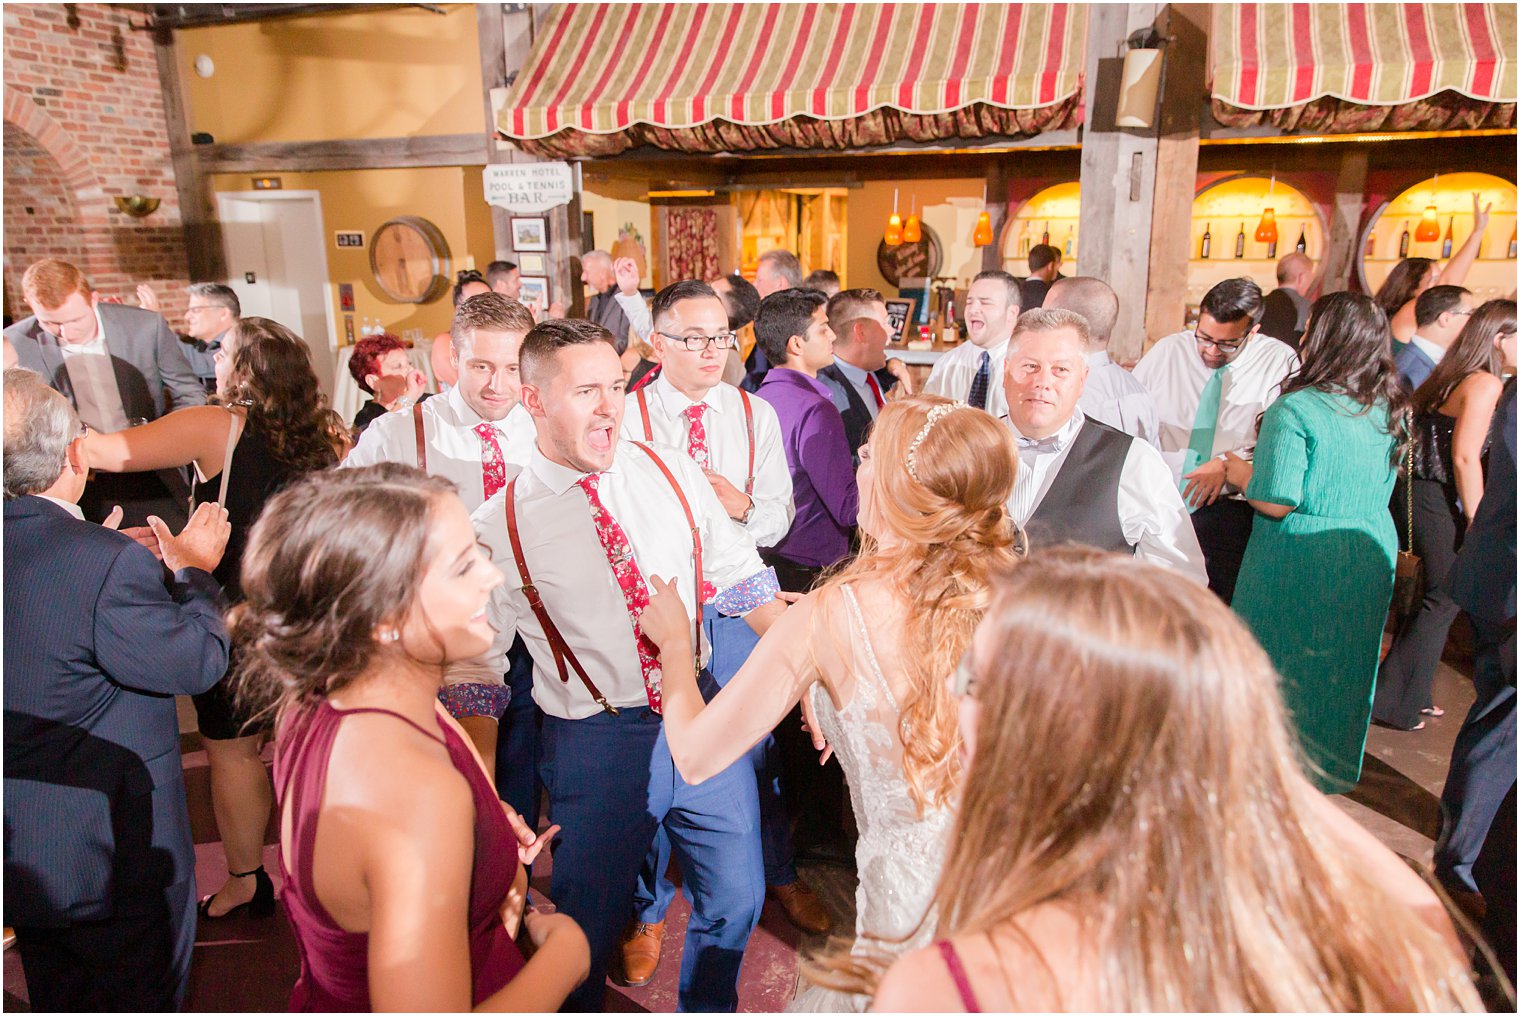 Guests on dance floor at Laurita Winery | SCE Event Group as DJ